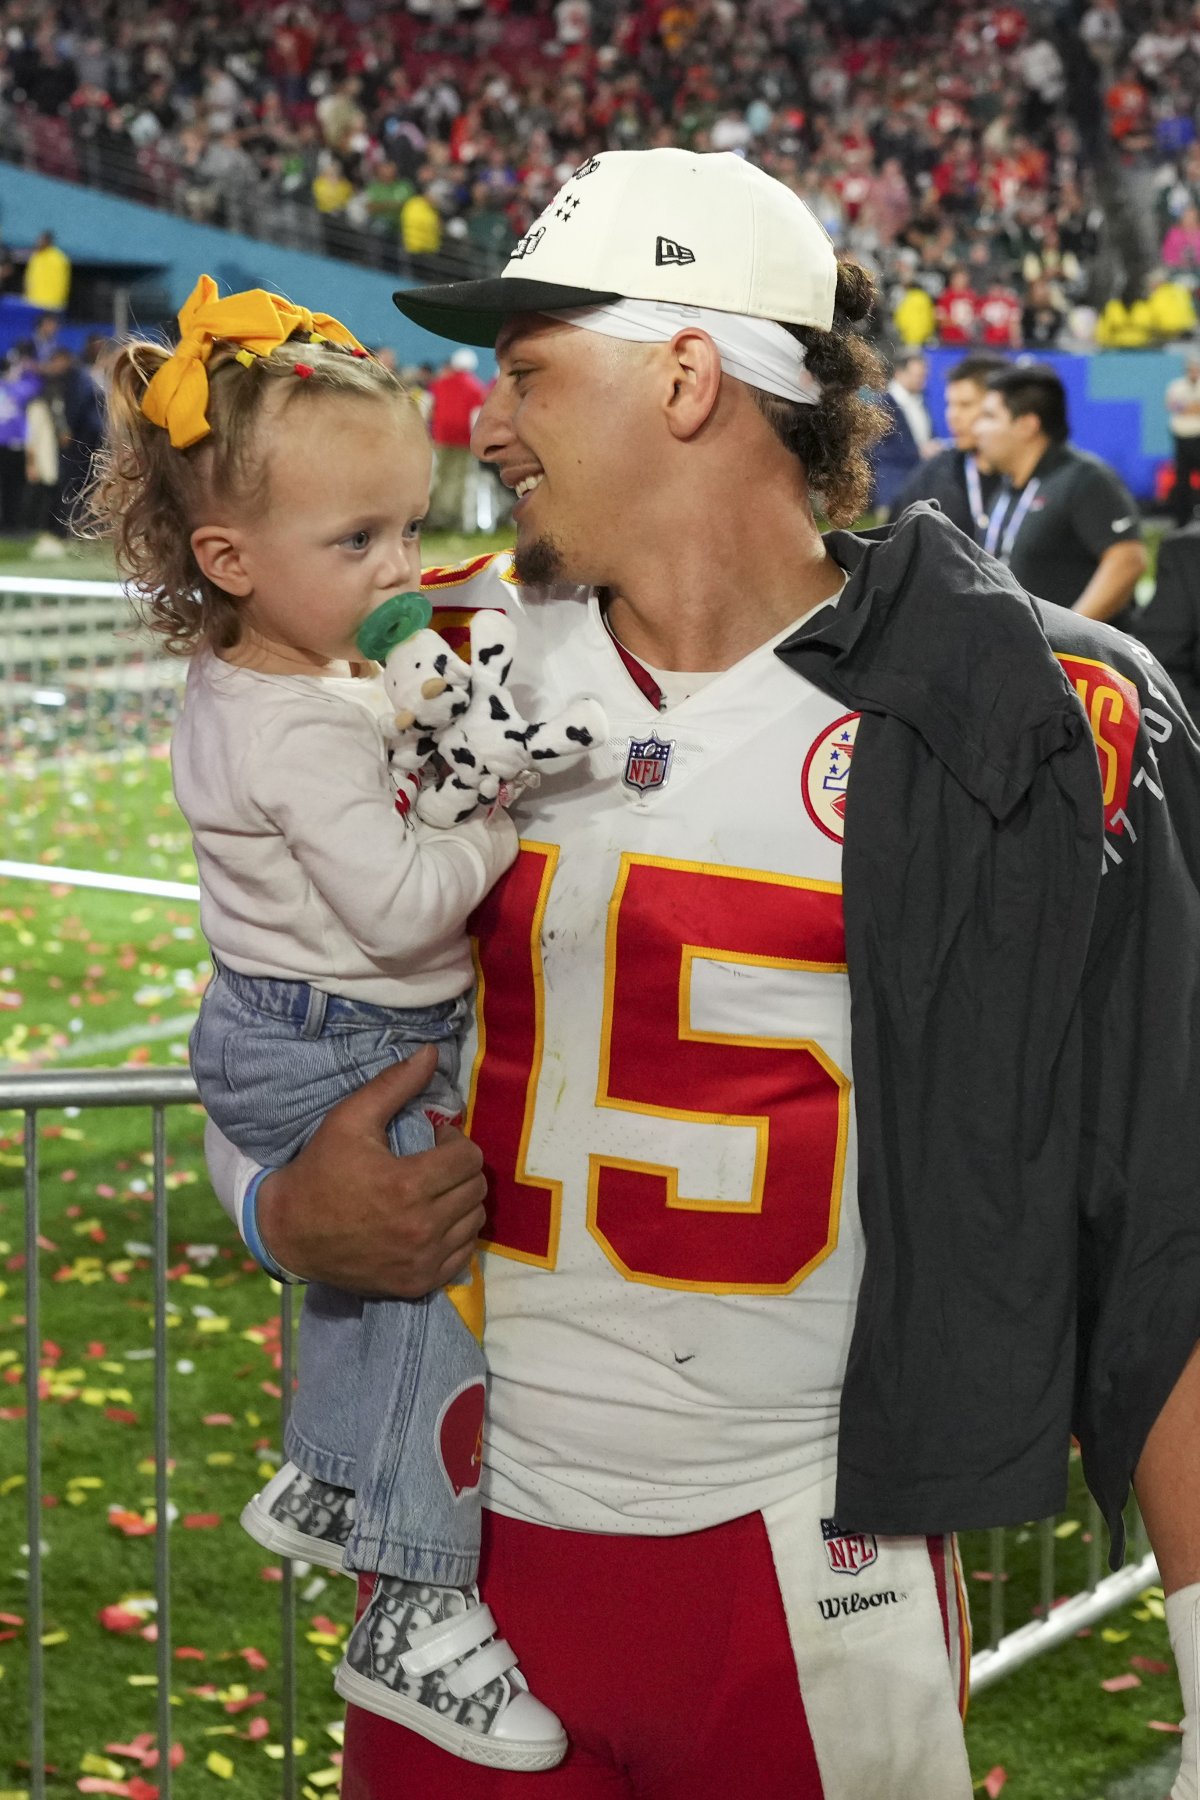 Patrick Mahomes reveals name of new child with wife Brittany